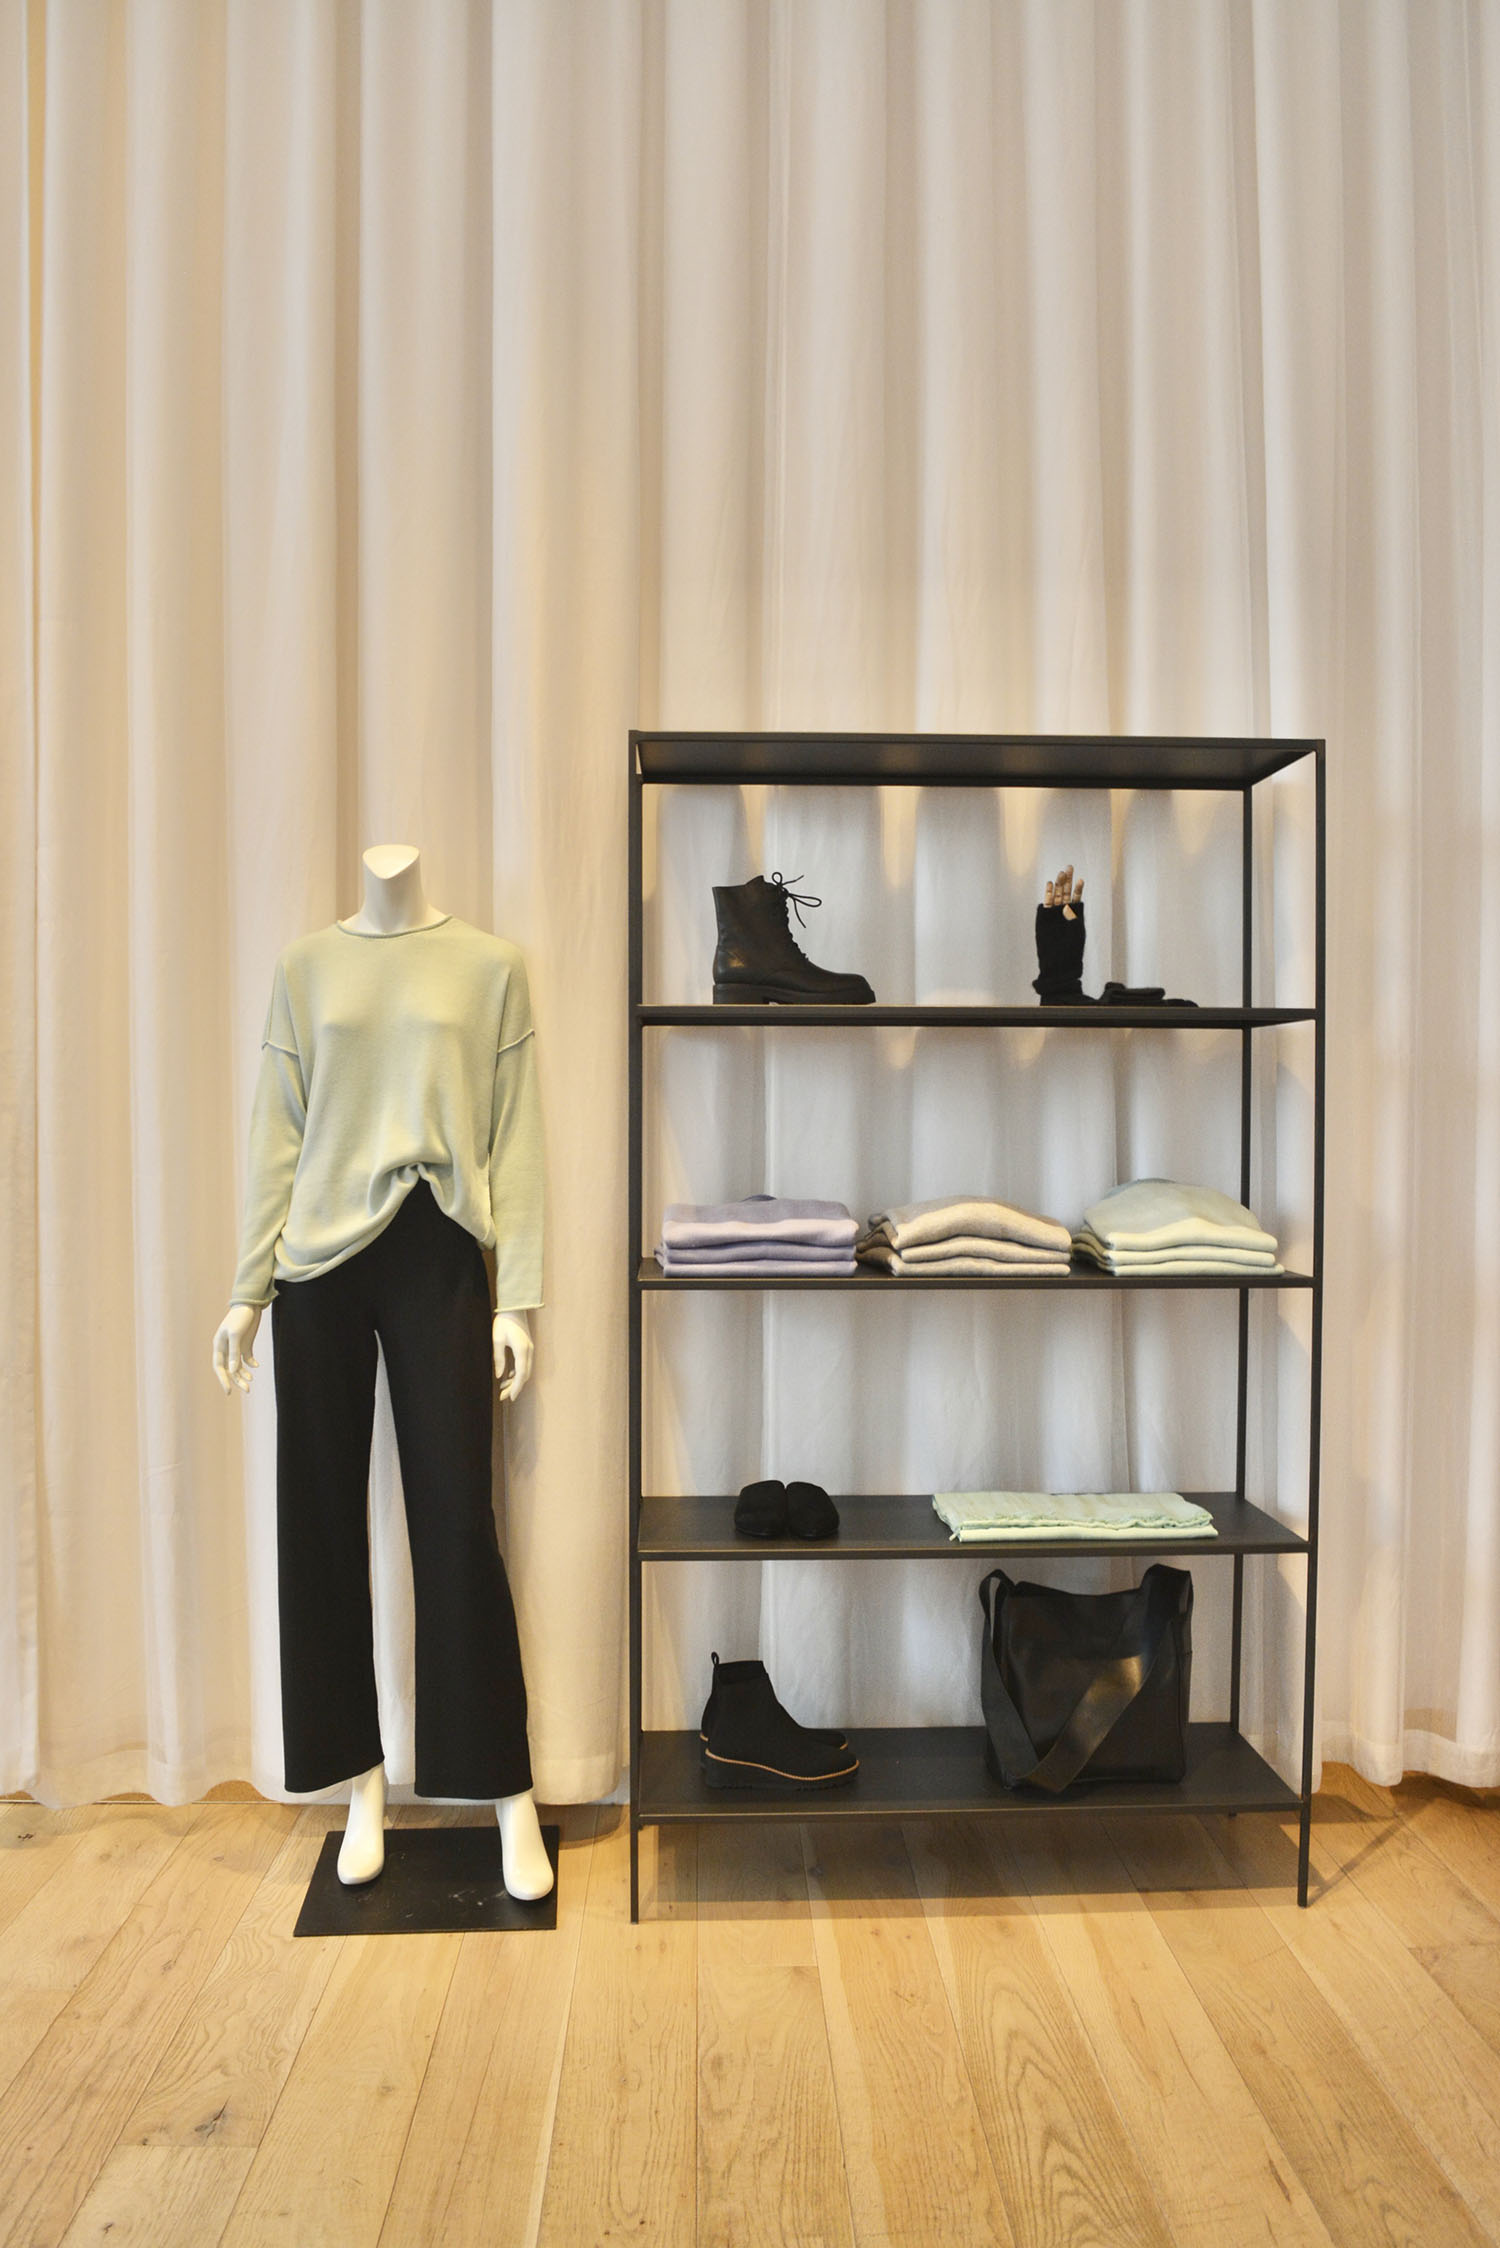 Eileen Fisher - Phillips Place